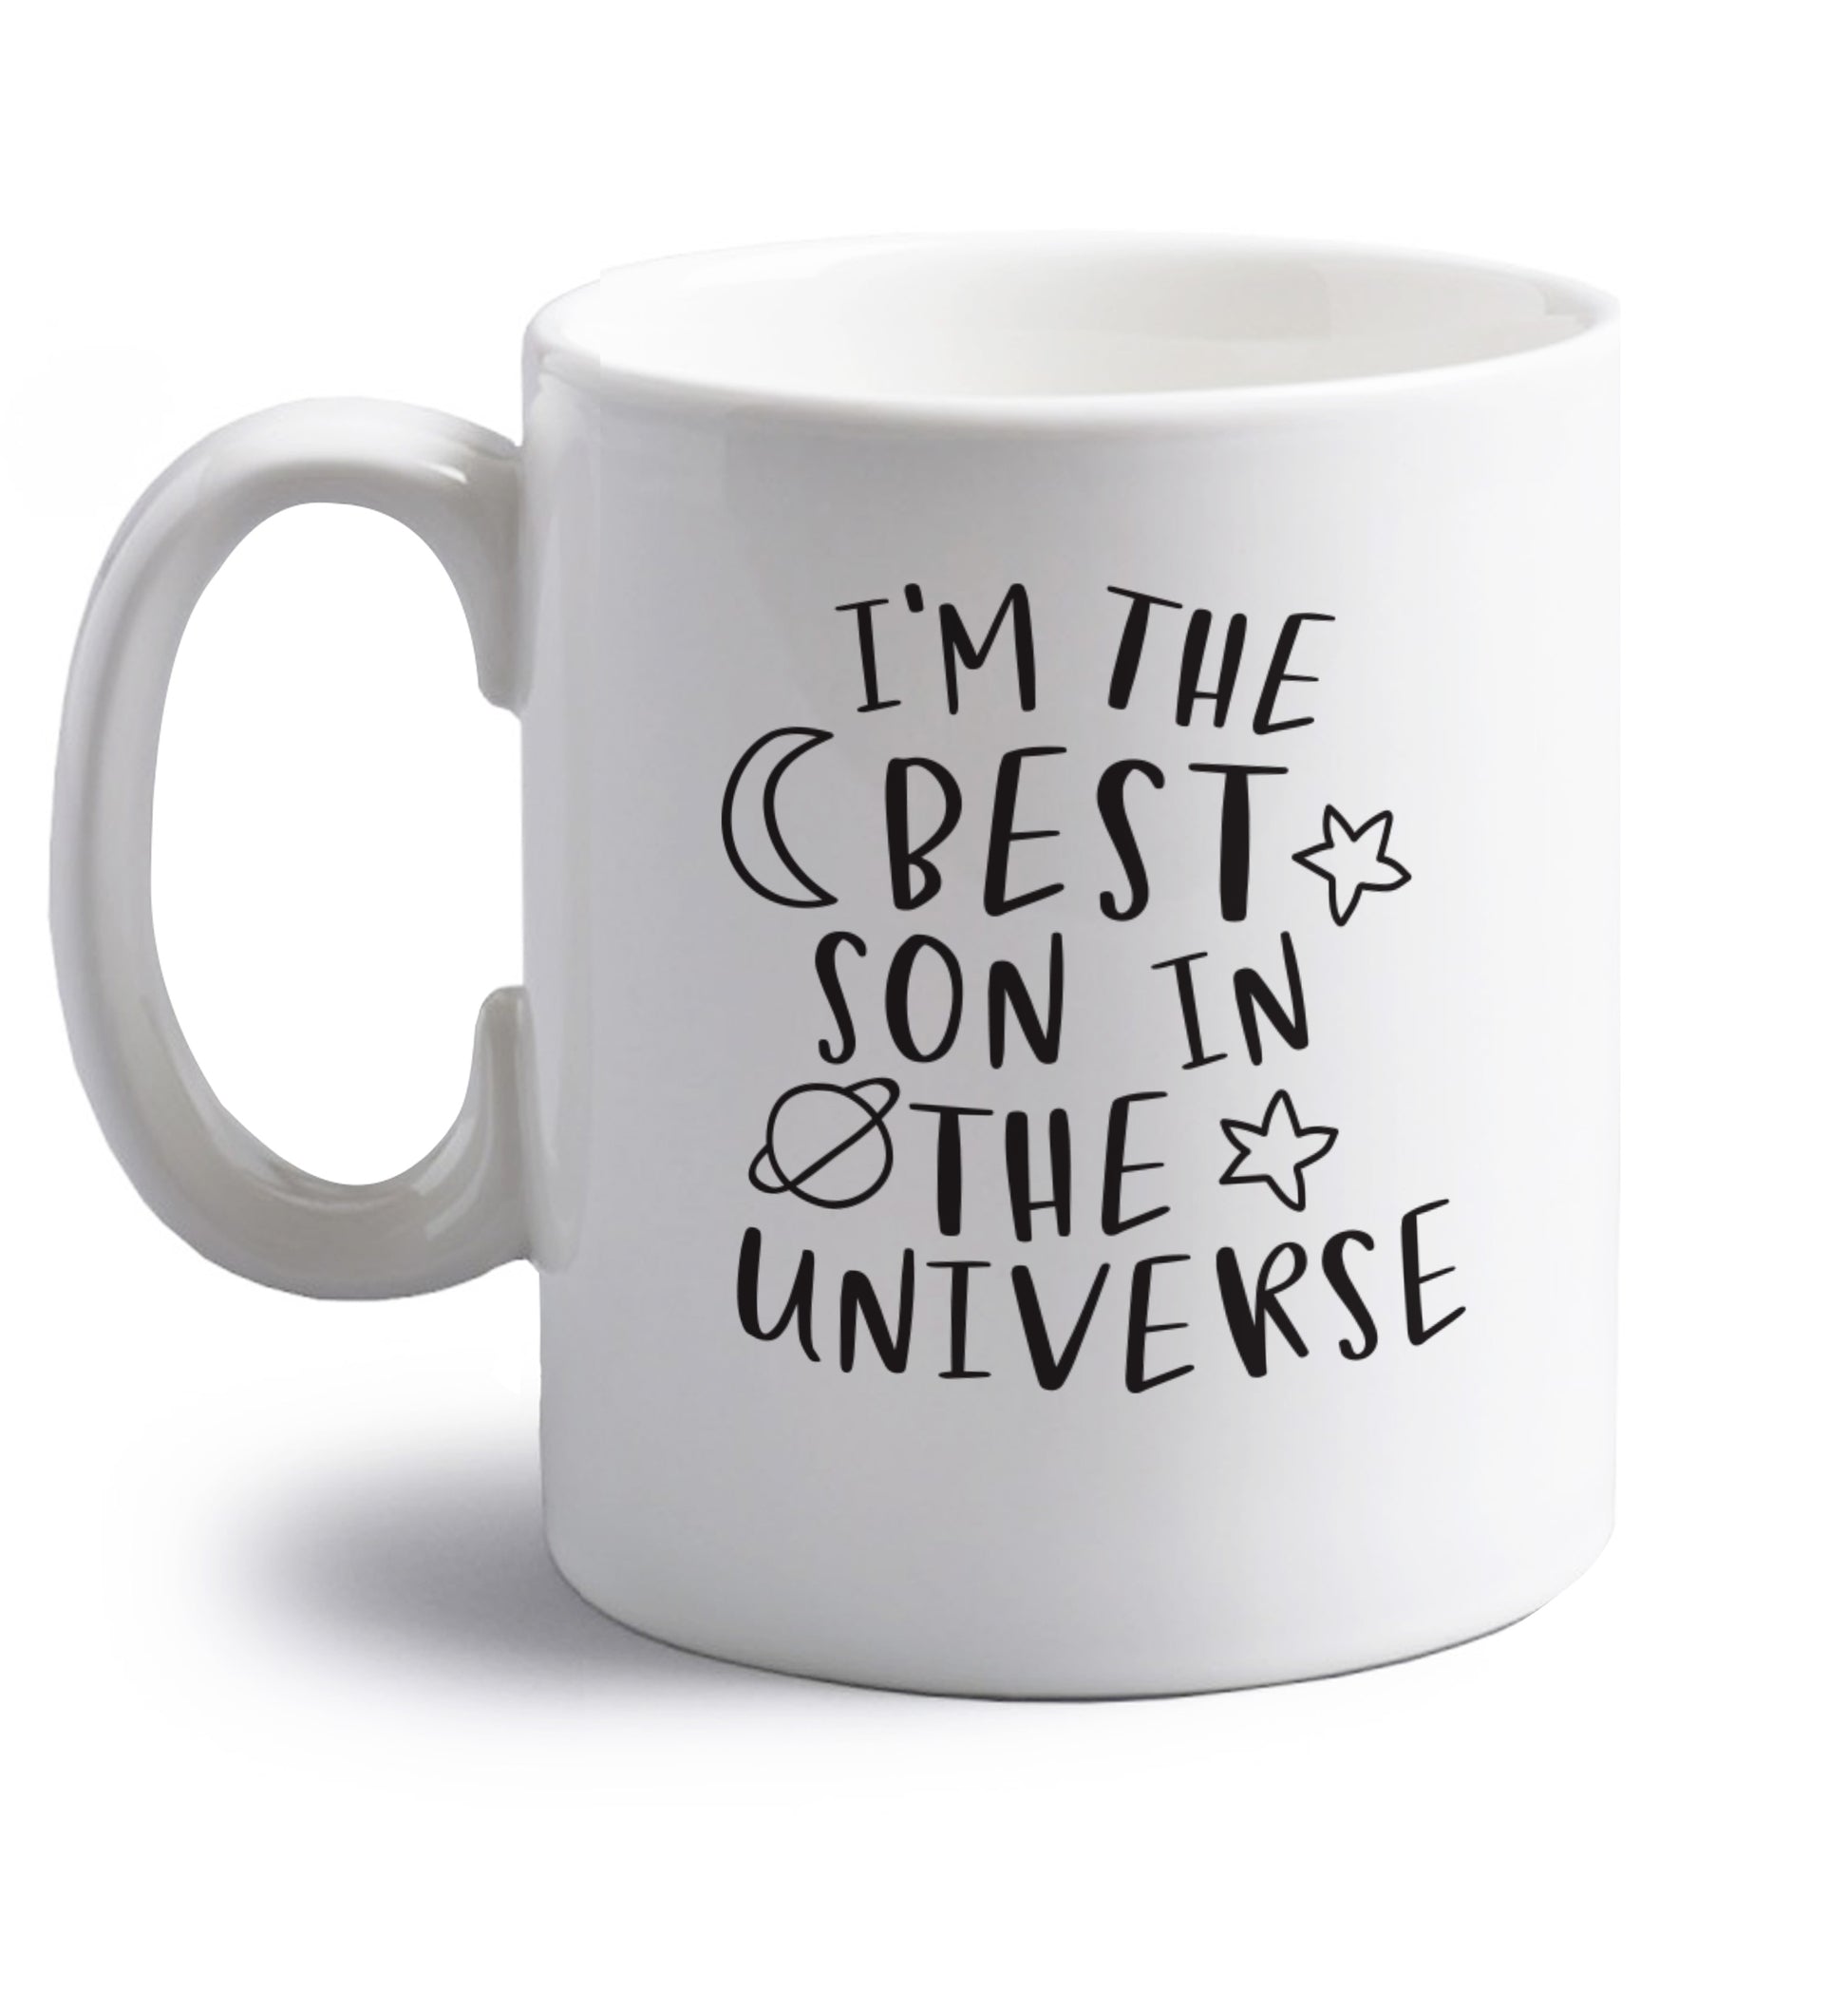 I'm the best son in the universe right handed white ceramic mug 